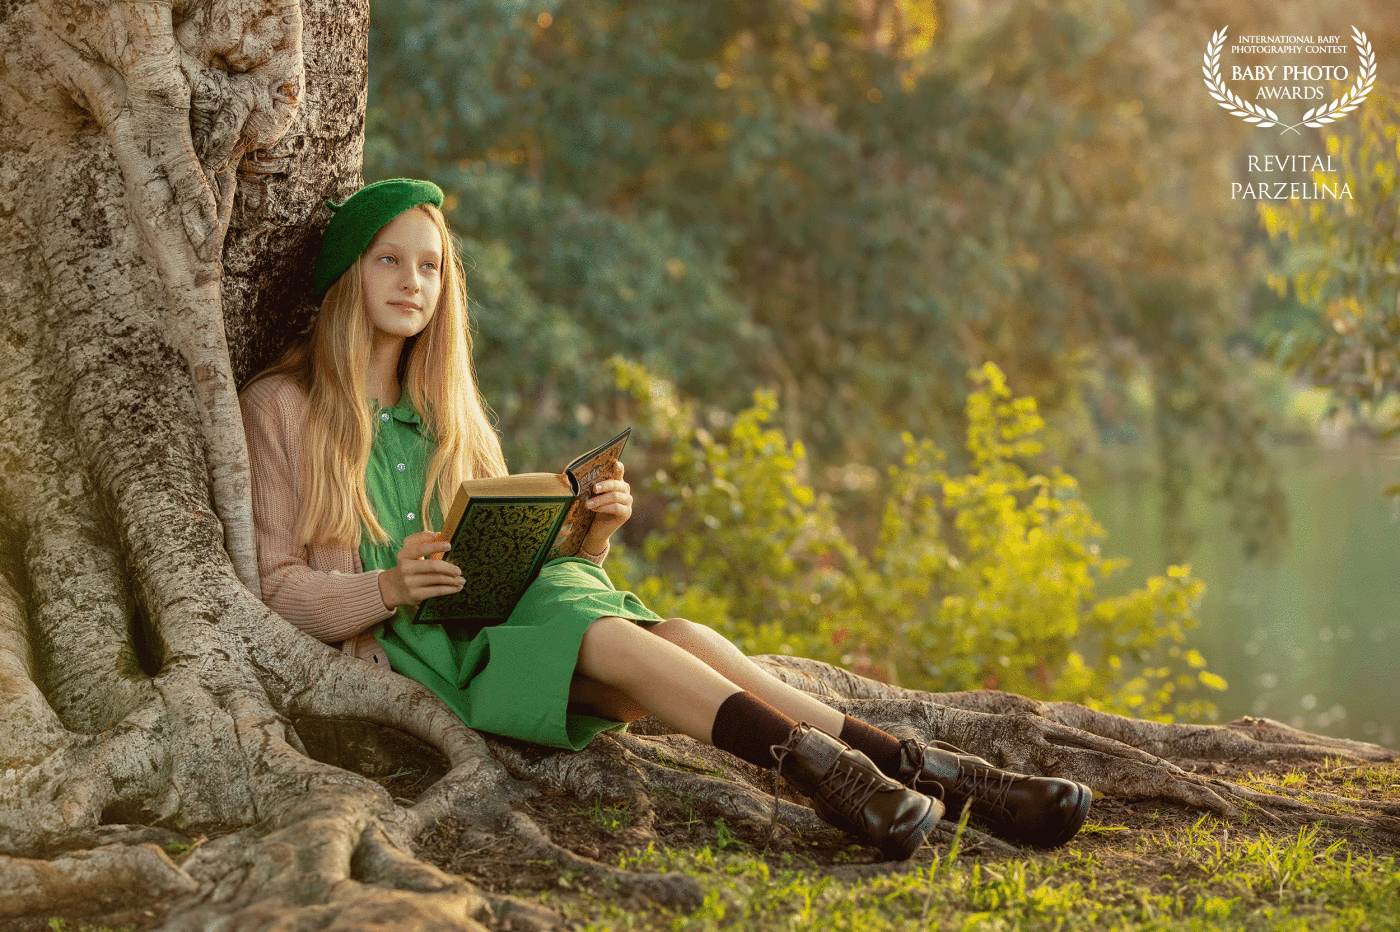 "Nestled by a majestic tree, a blonde girl finds solace, engrossed in a book's enchanting pages. The tranquil river flows nearby, offering a serene backdrop to her quiet reading retreat. A harmonious blend of nature, literature, and peaceful moments unfolds in this captivating scene."